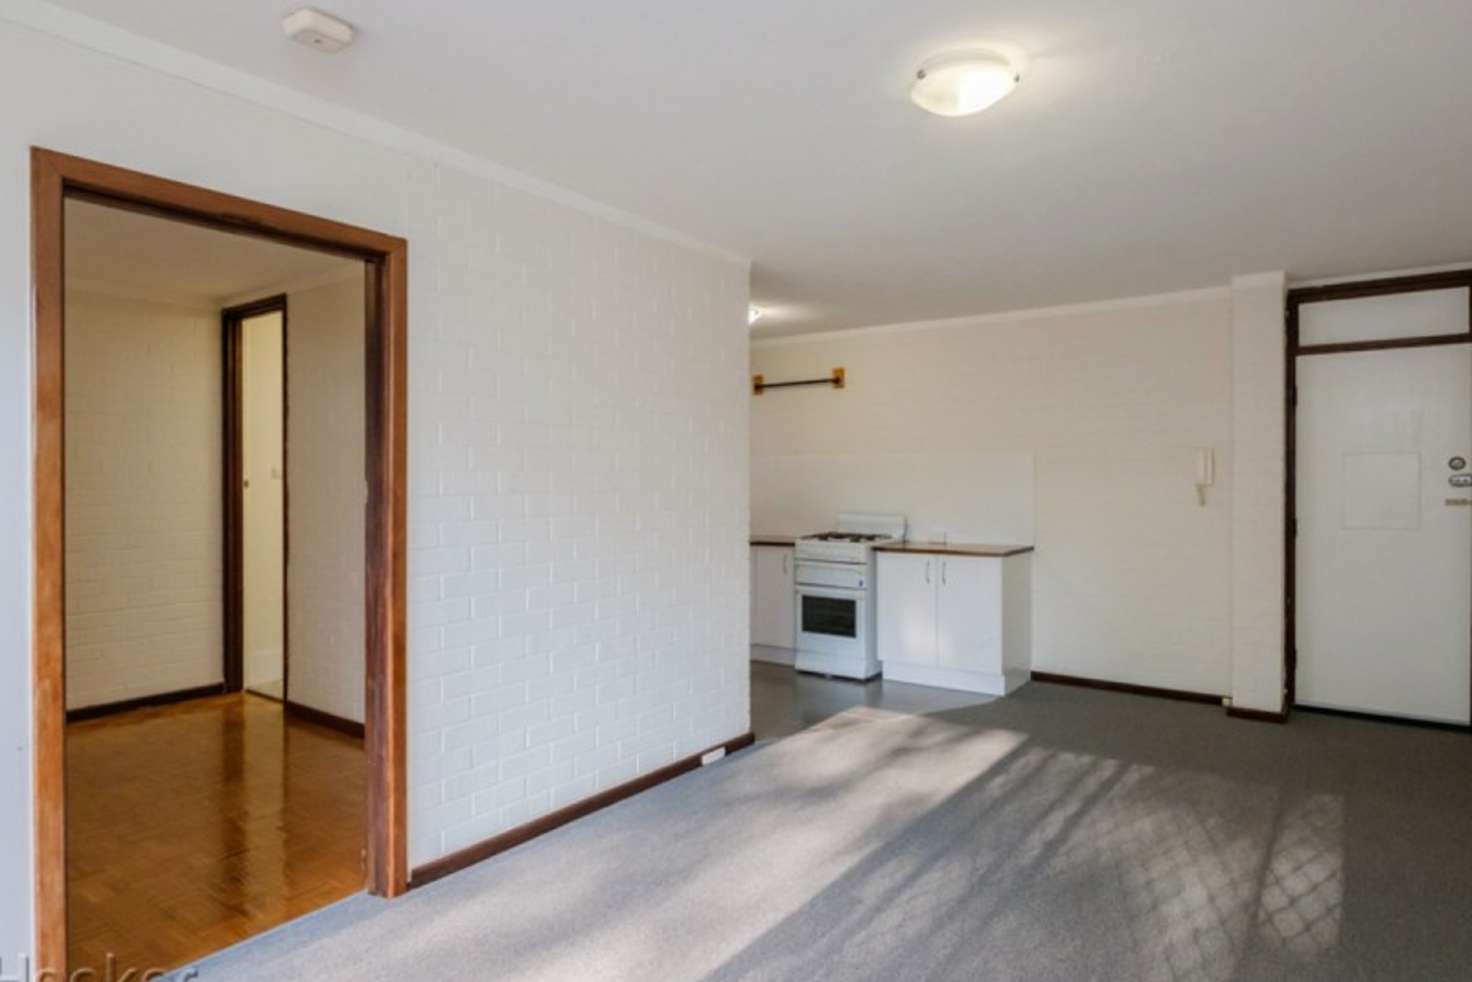 Main view of Homely apartment listing, 1/38 Waterloo Crescent, East Perth WA 6004